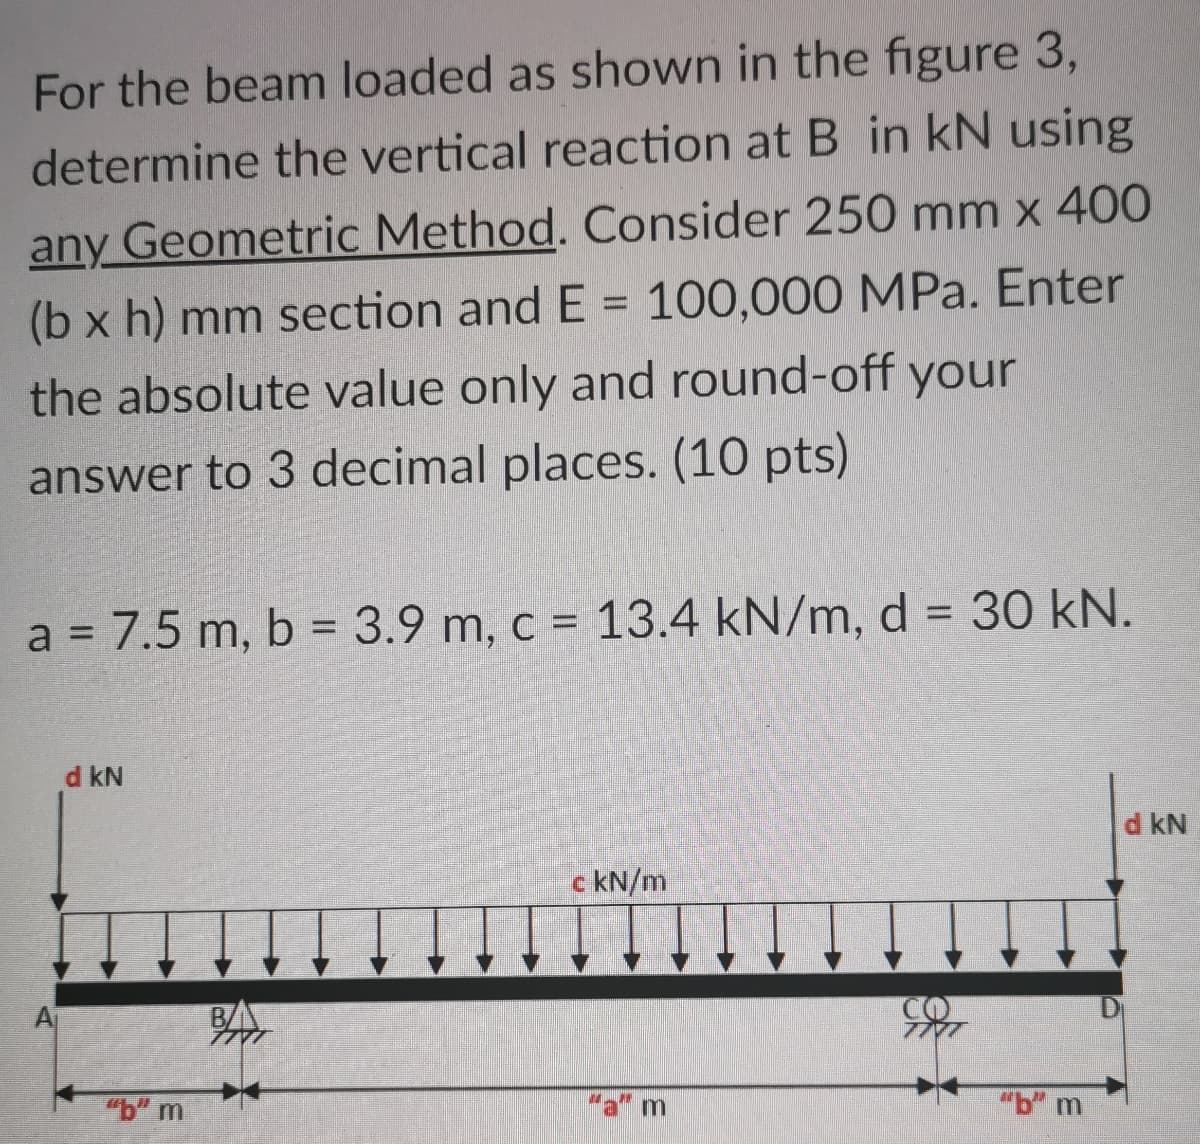 For the beam loaded as shown in the figure 3,
determine the vertical reaction at B in kN using
any Geometric Method. Consider 250 mm x 400
(b x h) mm section and E = 100,000 MPa. Enter
the absolute value only and round-off your
%3D
answer to 3 decimal places. (10 pts)
a = 7.5 m, b = 3.9 m, c = 13.4 kN/m, d = 30 kN.
d kN
d kN
c kN/m
BA
D
"b" m
"a" m
"b" m
